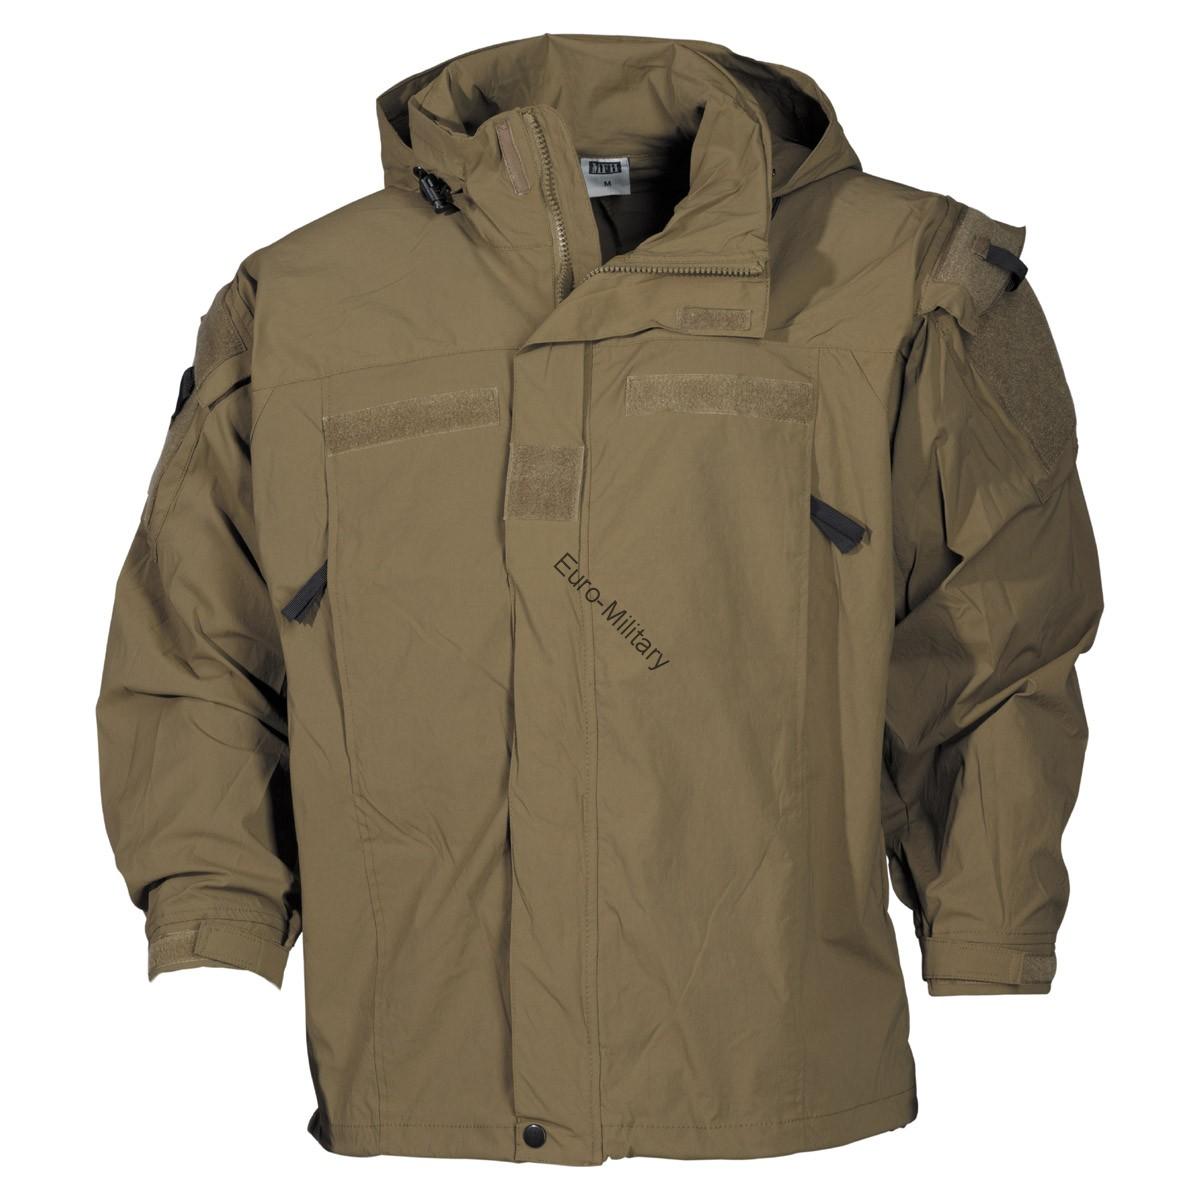 Tactical Military Soft Shell Waterproof Jacket GEN 3 - Coyote